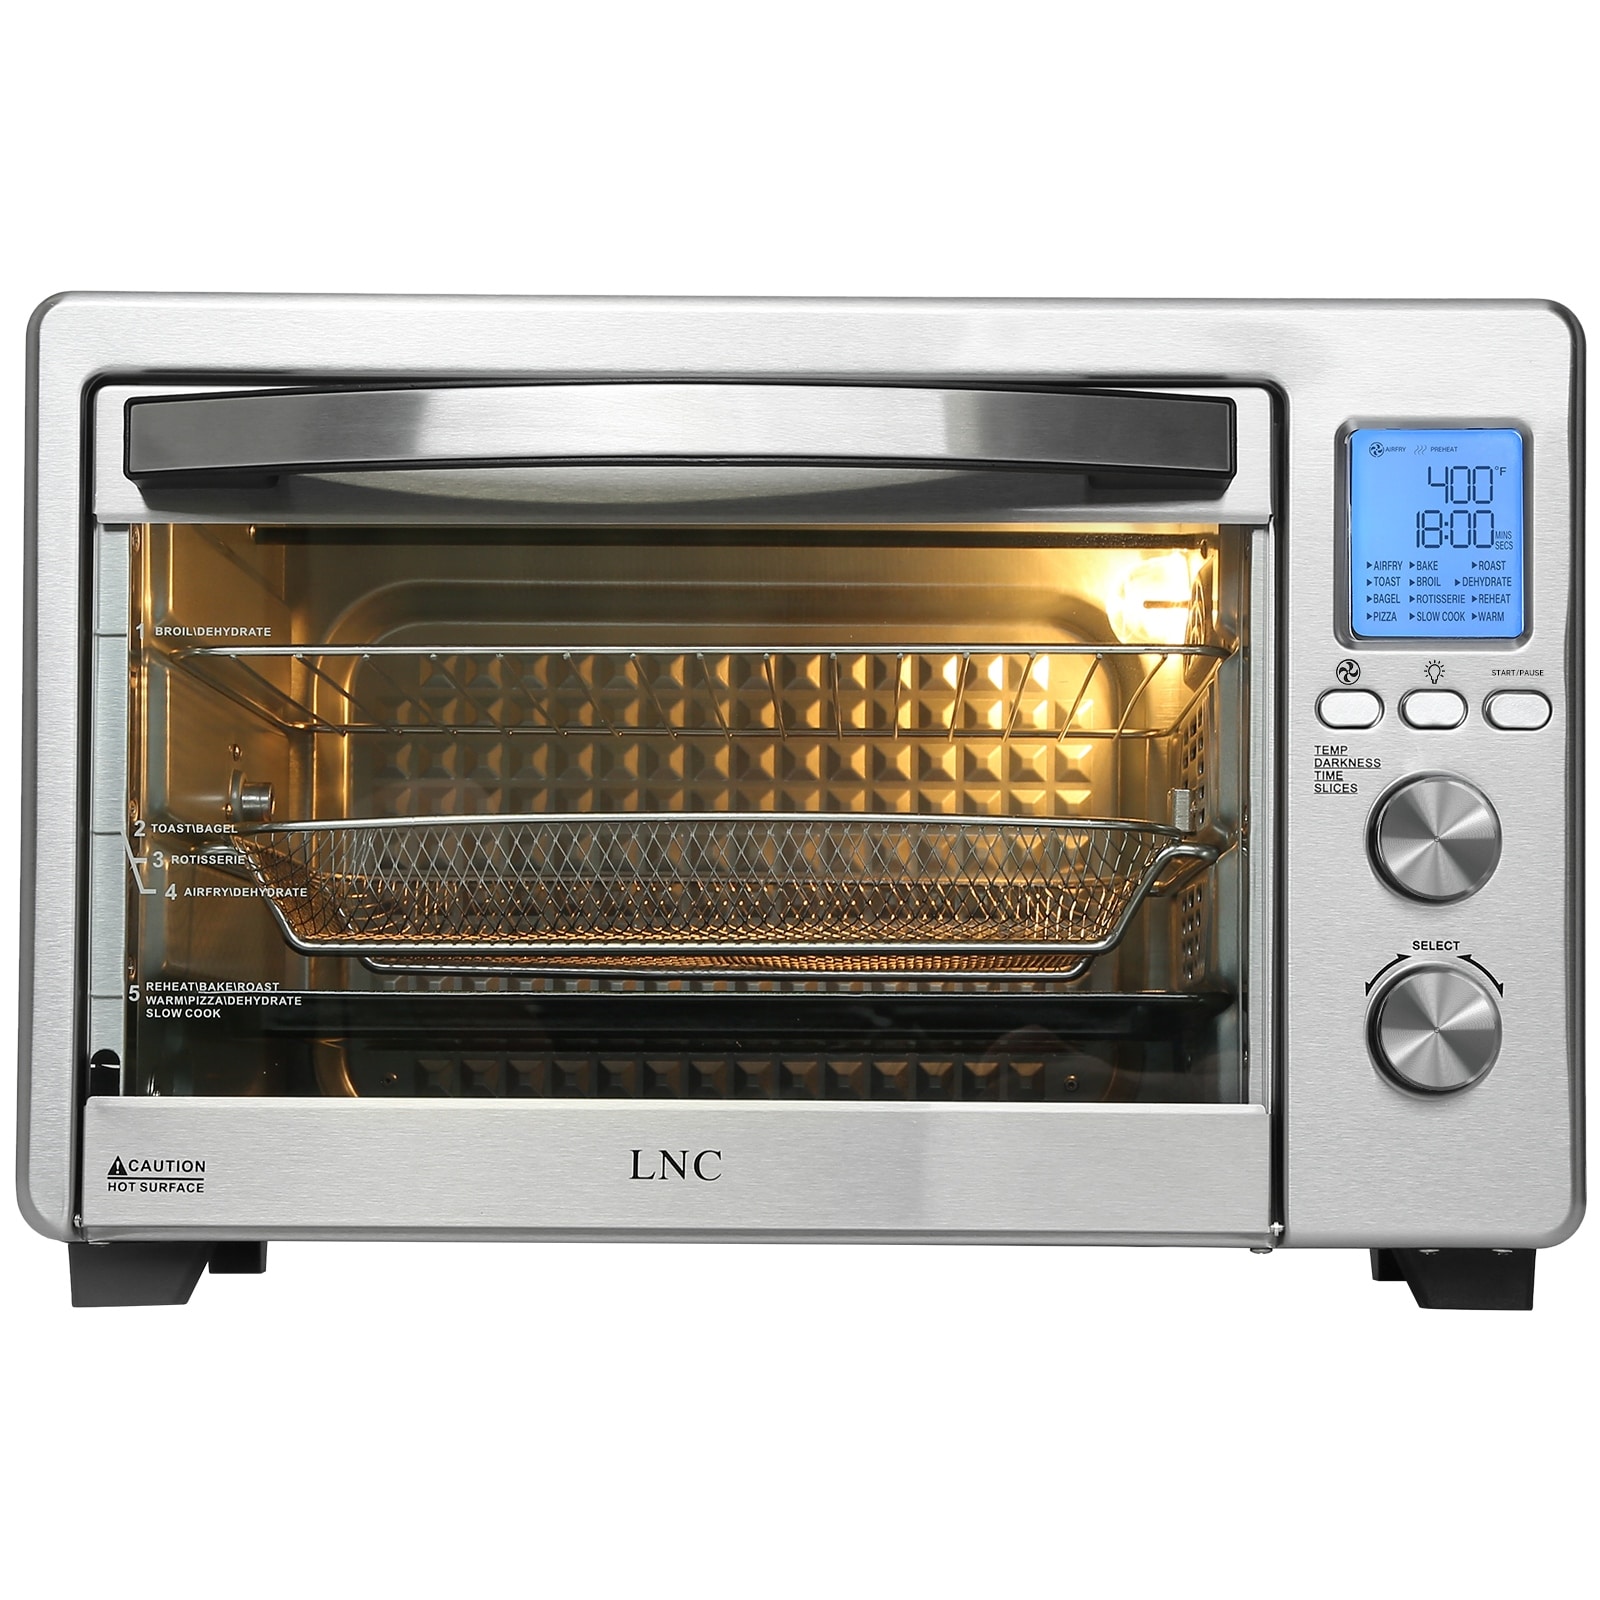 https://ak1.ostkcdn.com/images/products/is/images/direct/c7afccd7fbc5fca1a07589bb76b3d70c1b933fc8/LNC-12-In-1-Large-34QT-Countertop-Toaster-Oven-Convection-Rotisserie-Air-Fryer.jpg